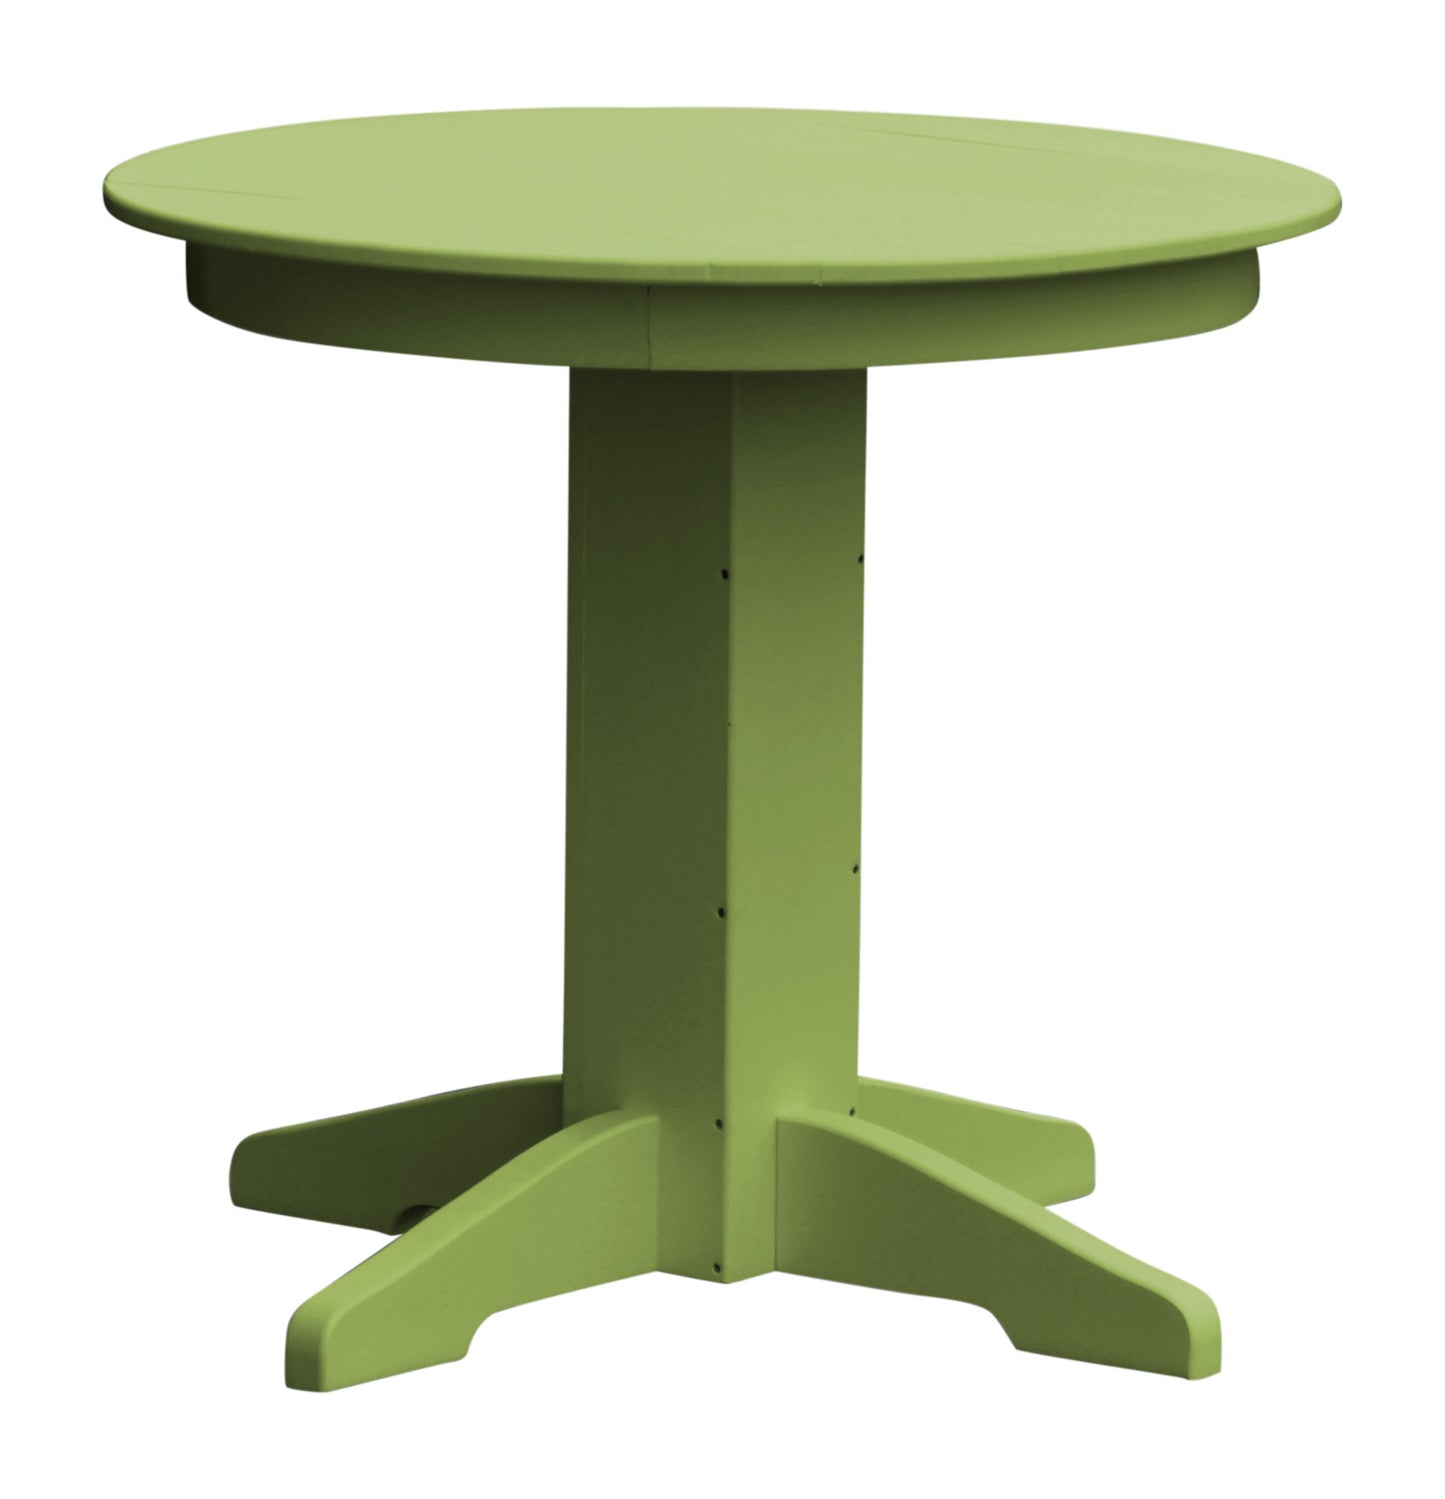 A&L Furniture Recycled Plastic 33" Round Dining Table - Tropical Lime